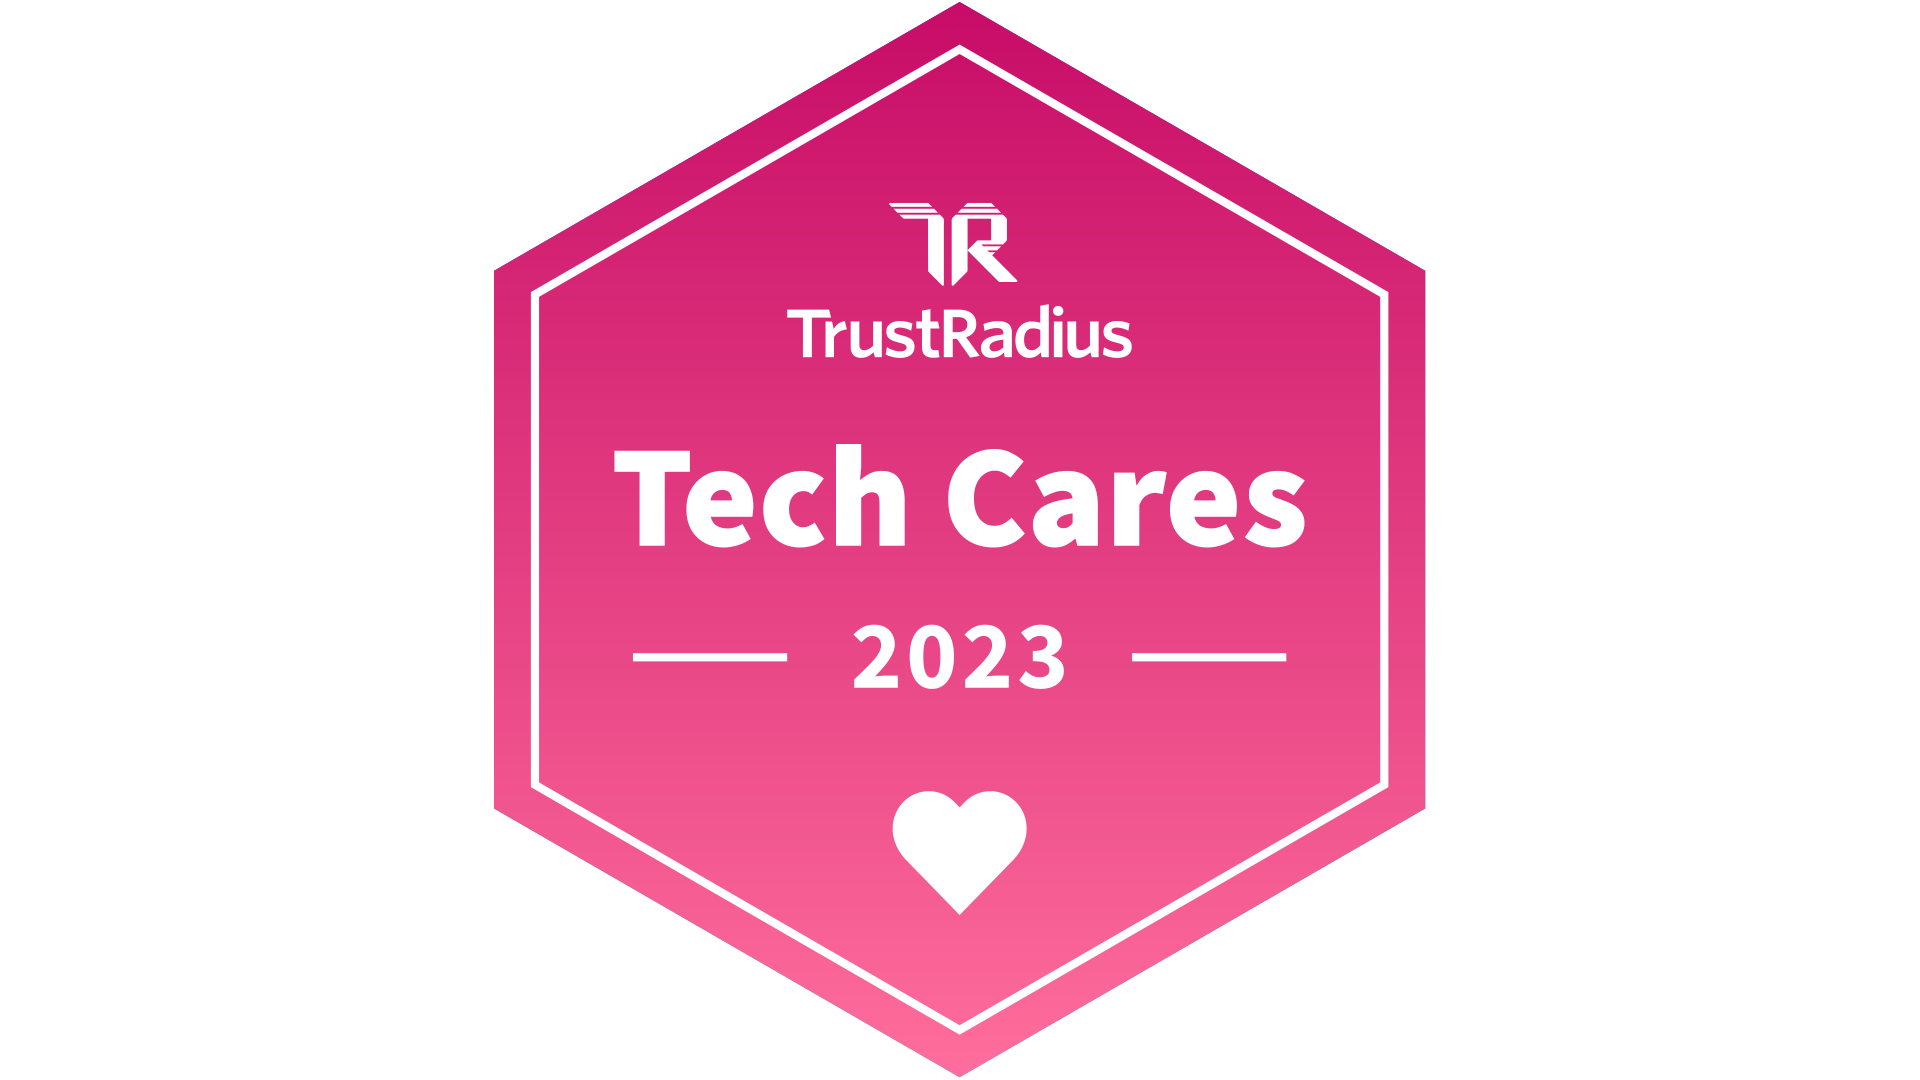 Siemens receives the 2023 Tech Cares Award from TrustRadius